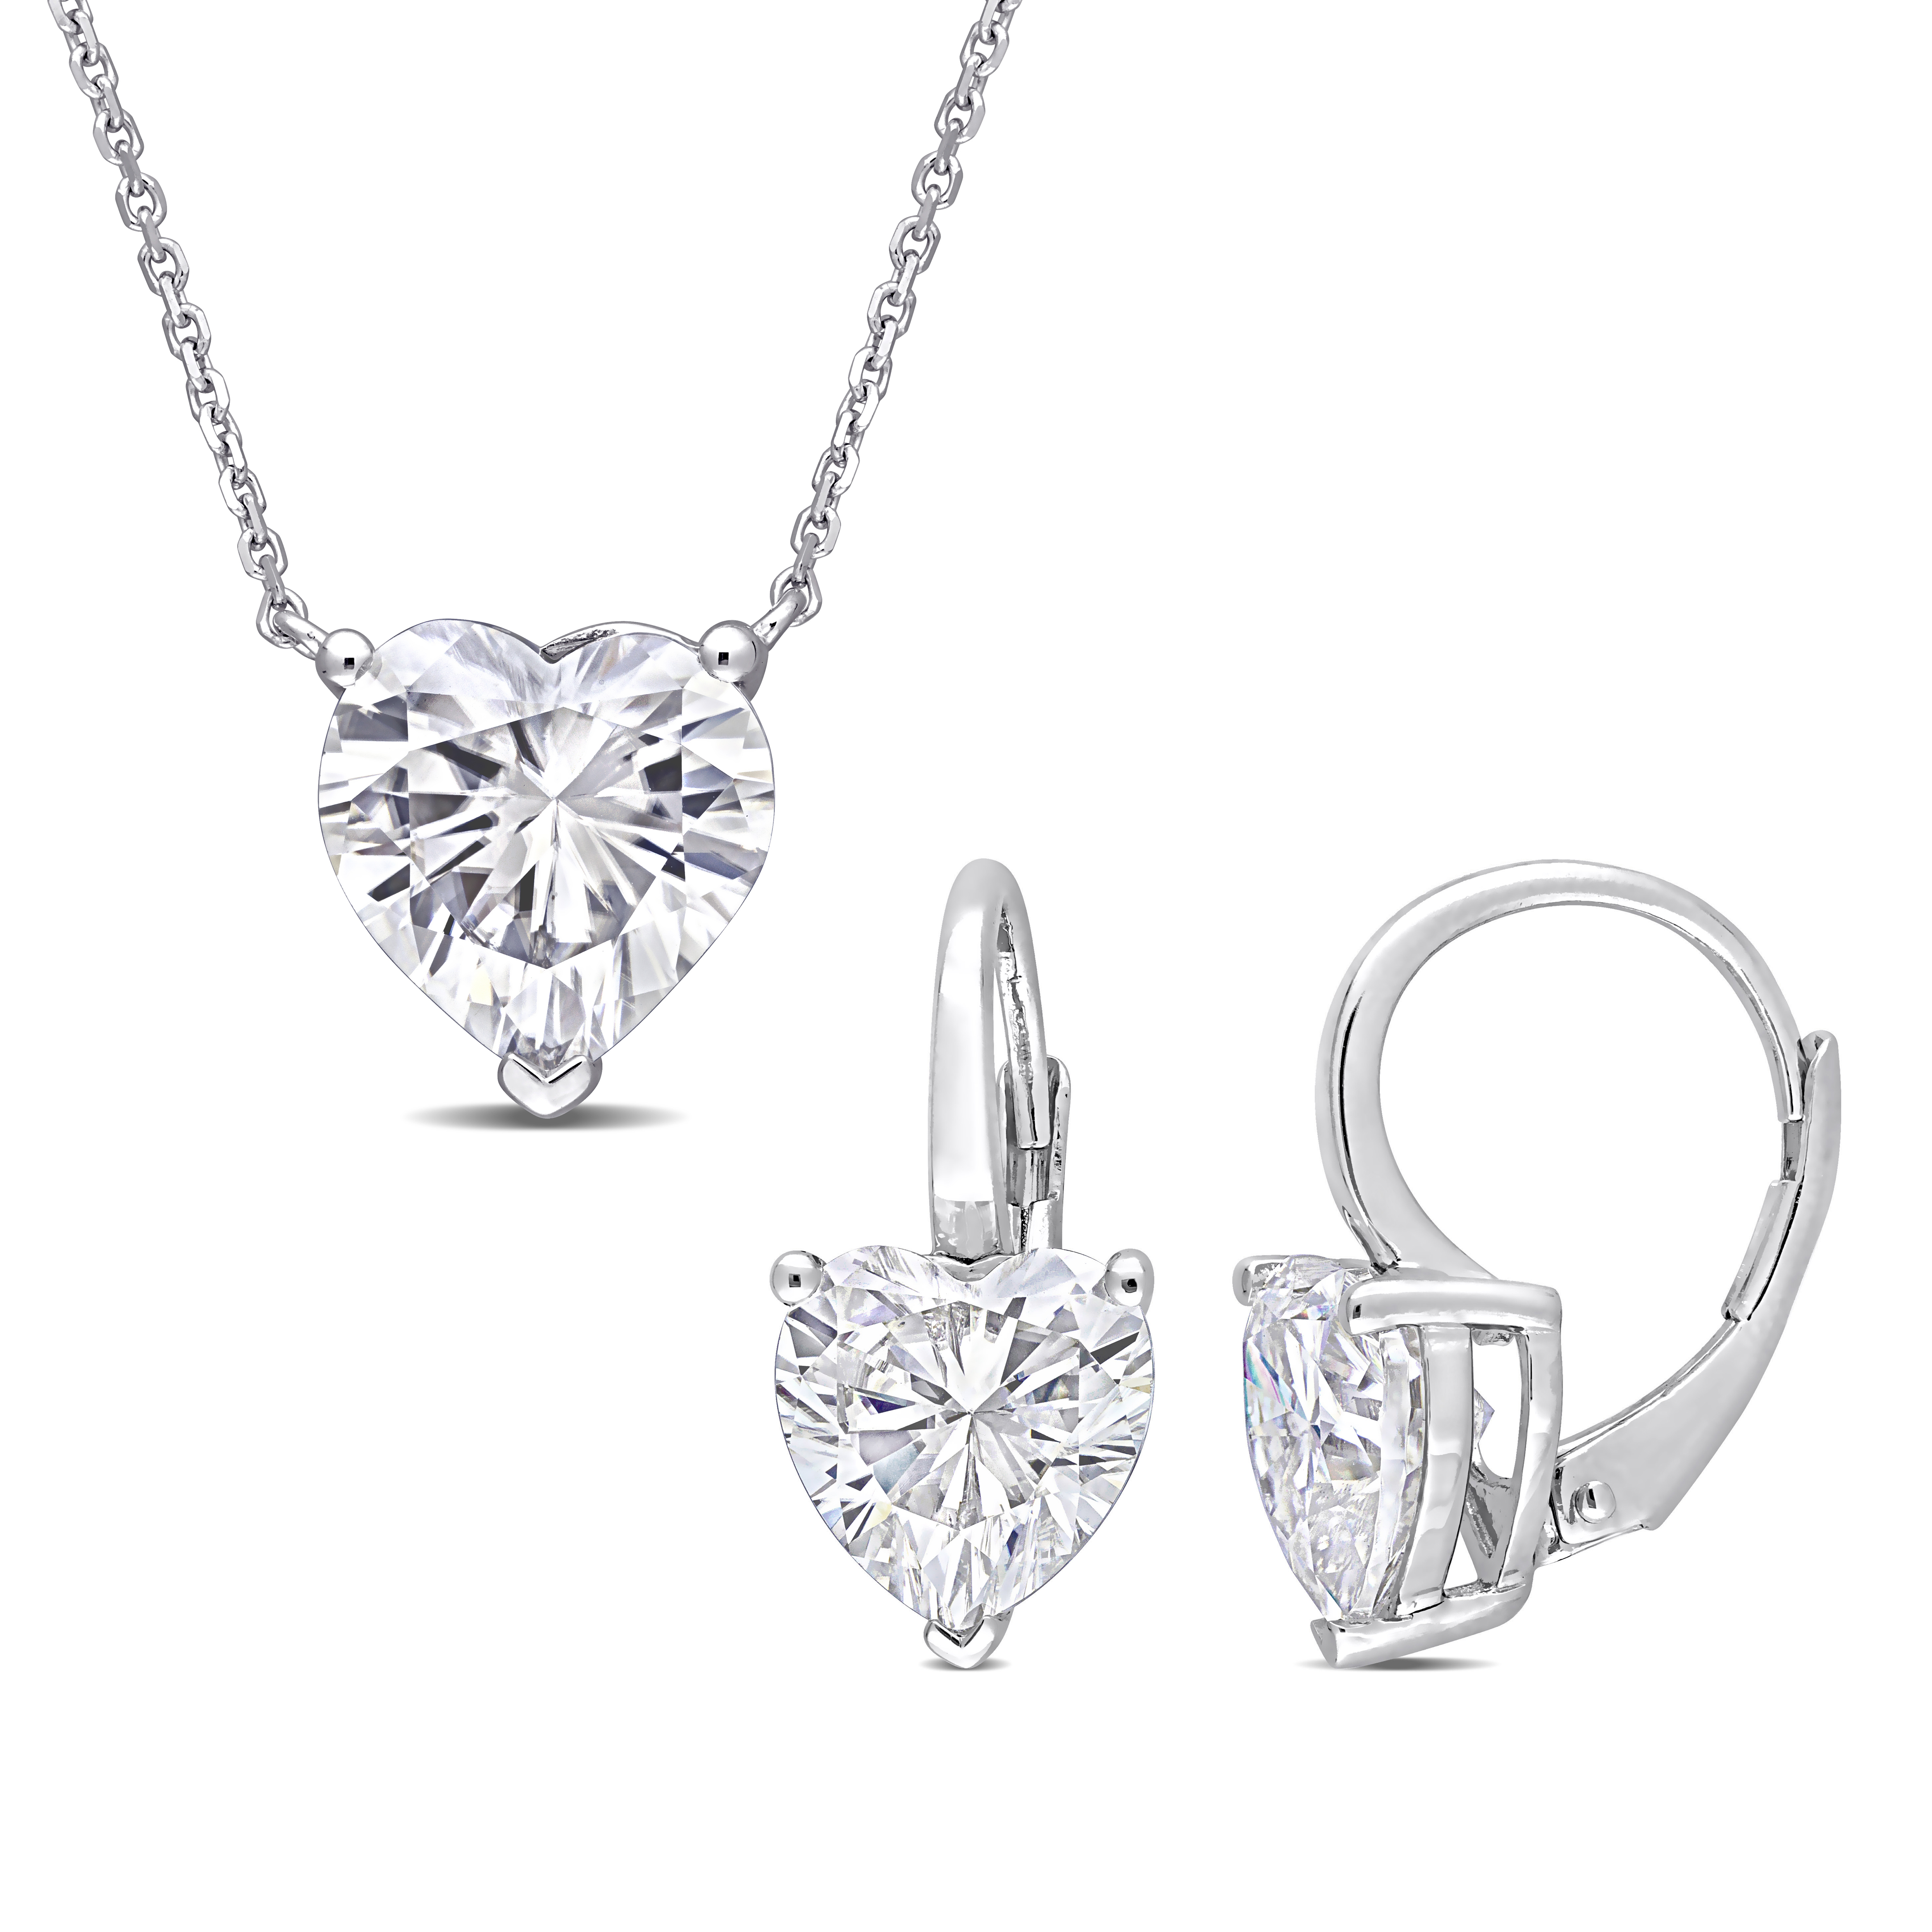 7 1/2 CT DEW Heart Shape Created Moissanite Solitaire Leverback Earrings and Pendant 2-Piece Set in 14k White Gold